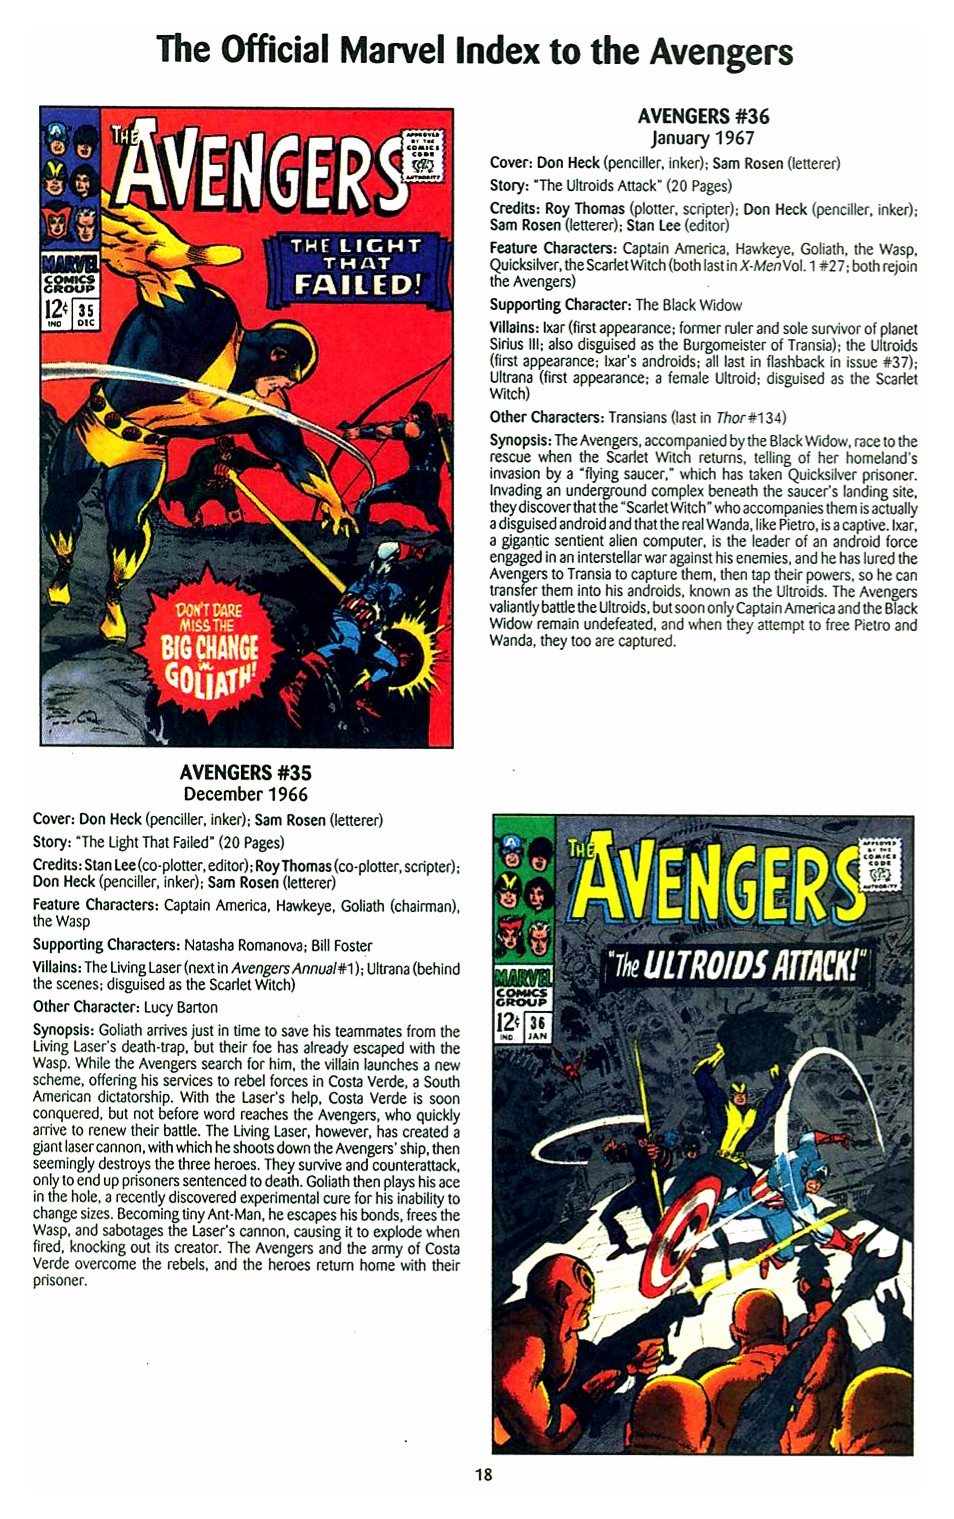 Read online The Official Marvel Index to the Avengers comic -  Issue #1 - 20